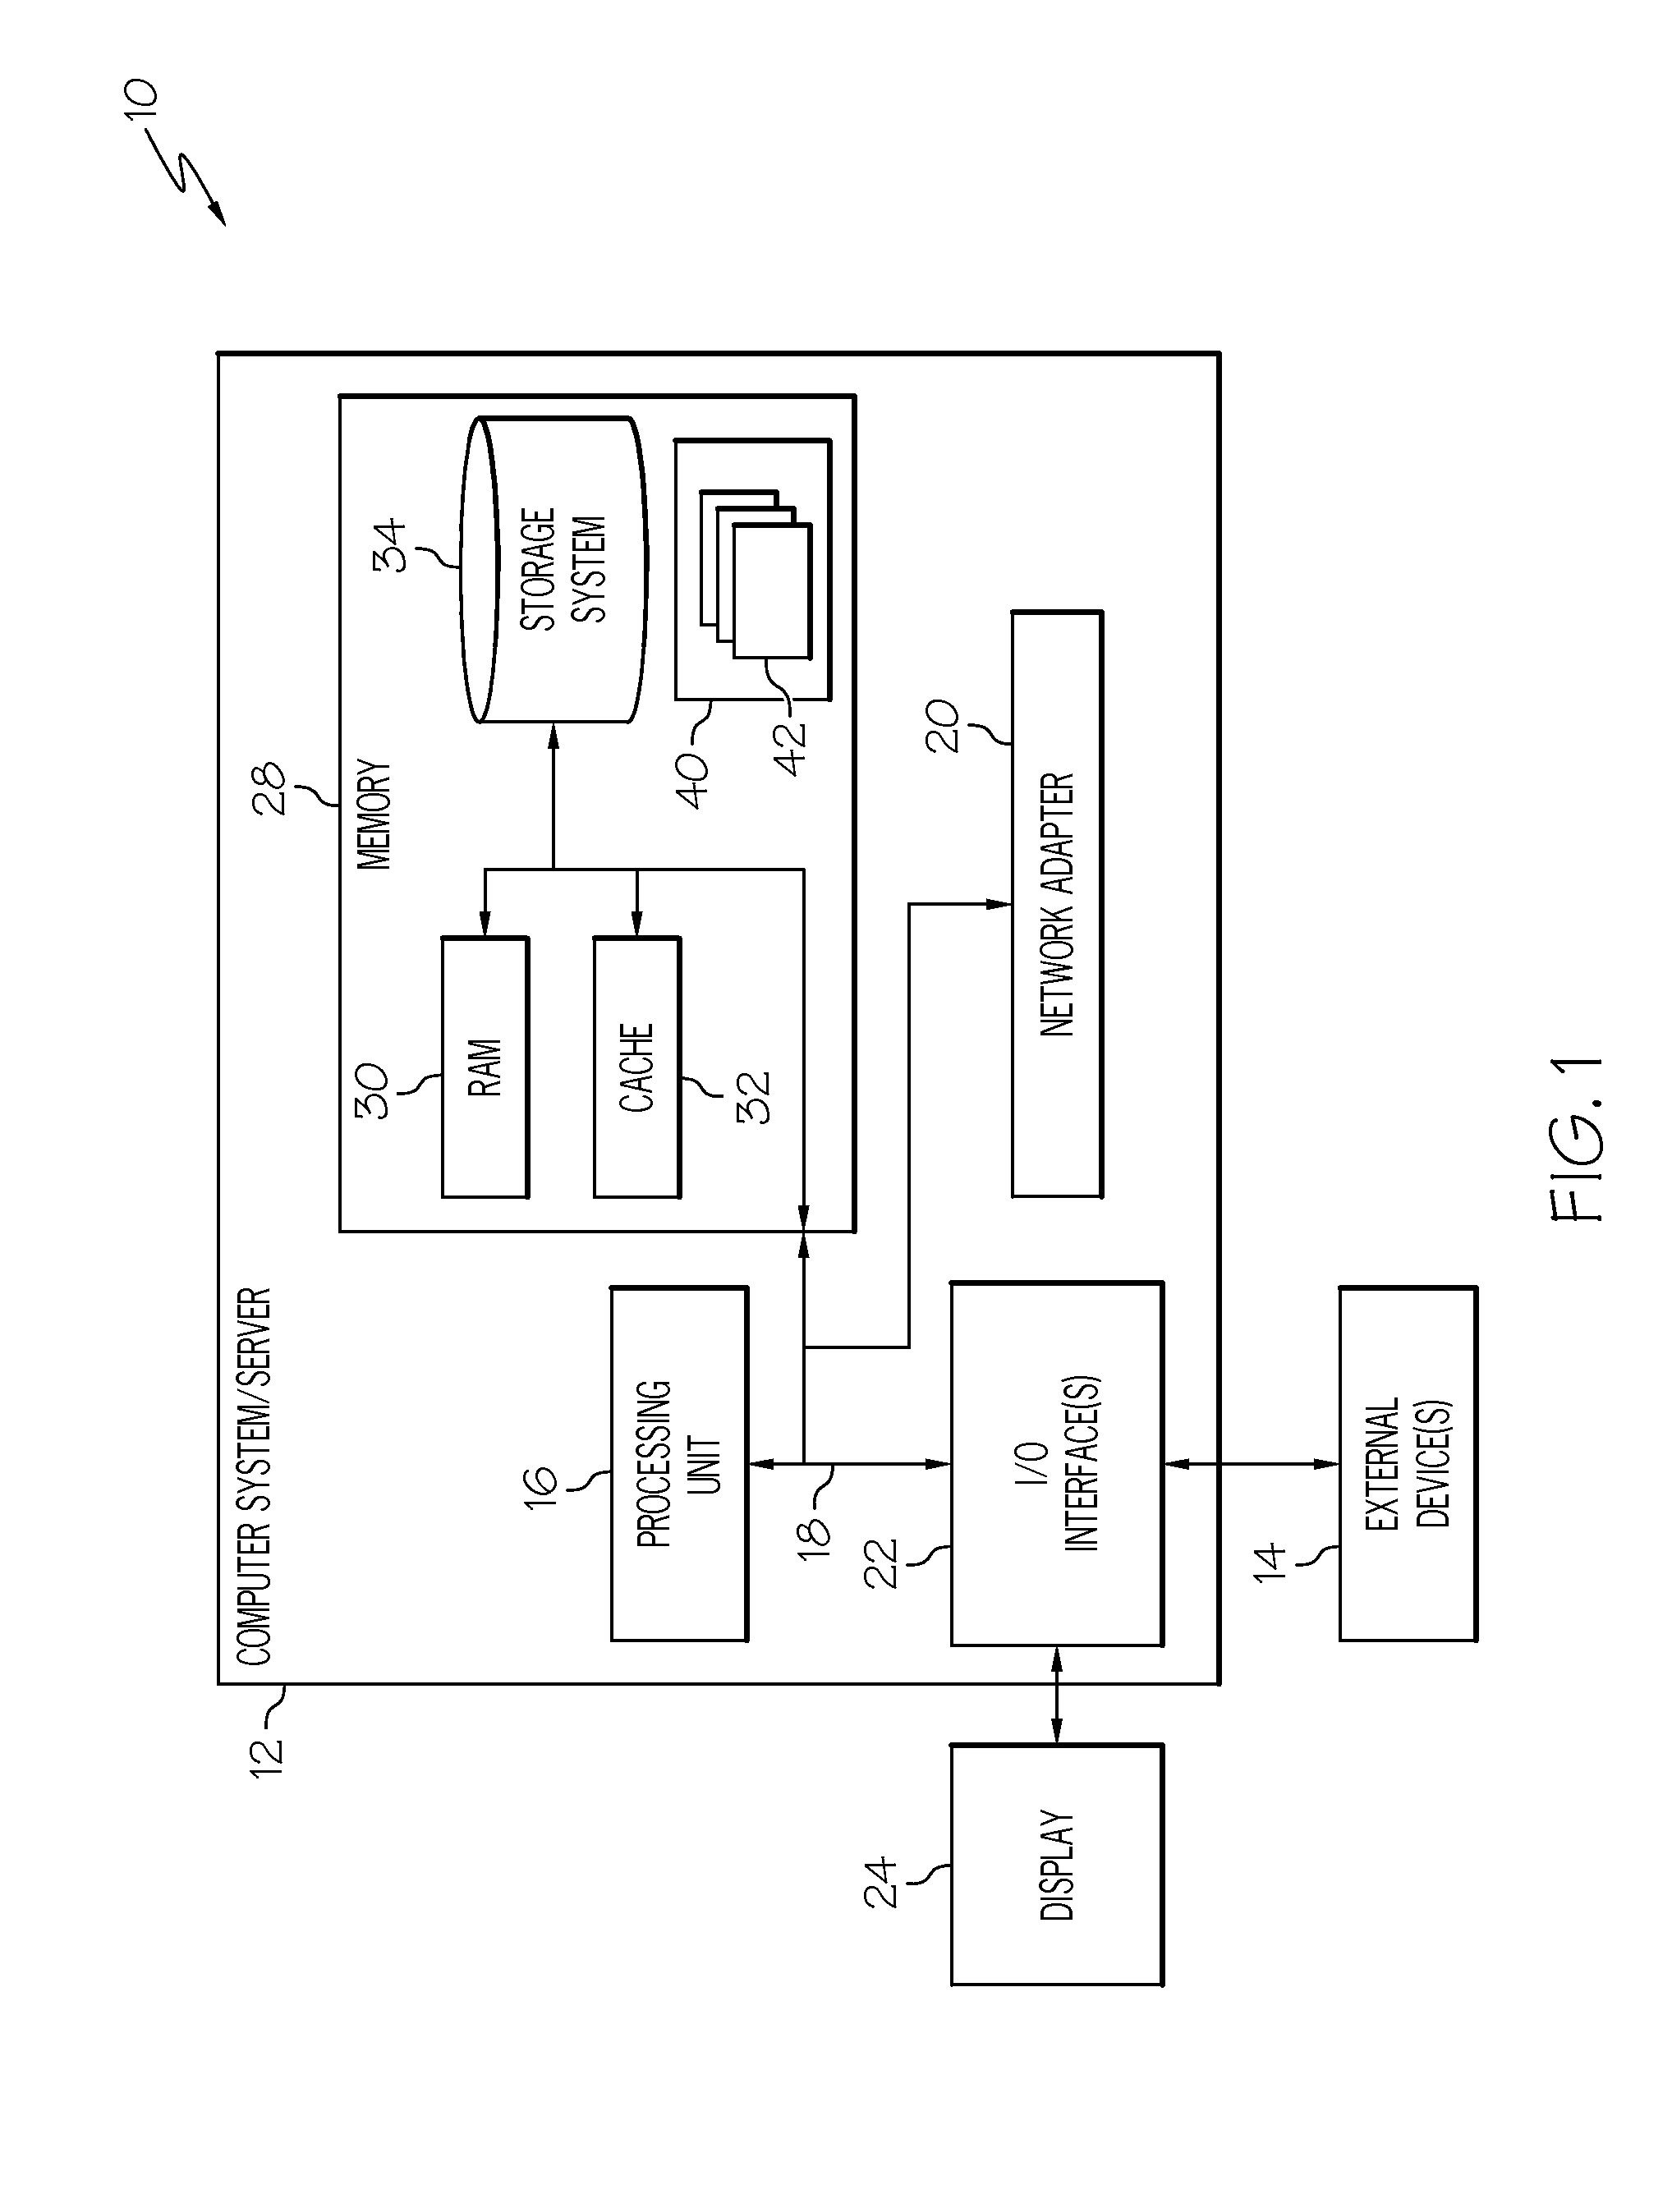 Dynamic access control for documents in electronic communications within a networked computing environment